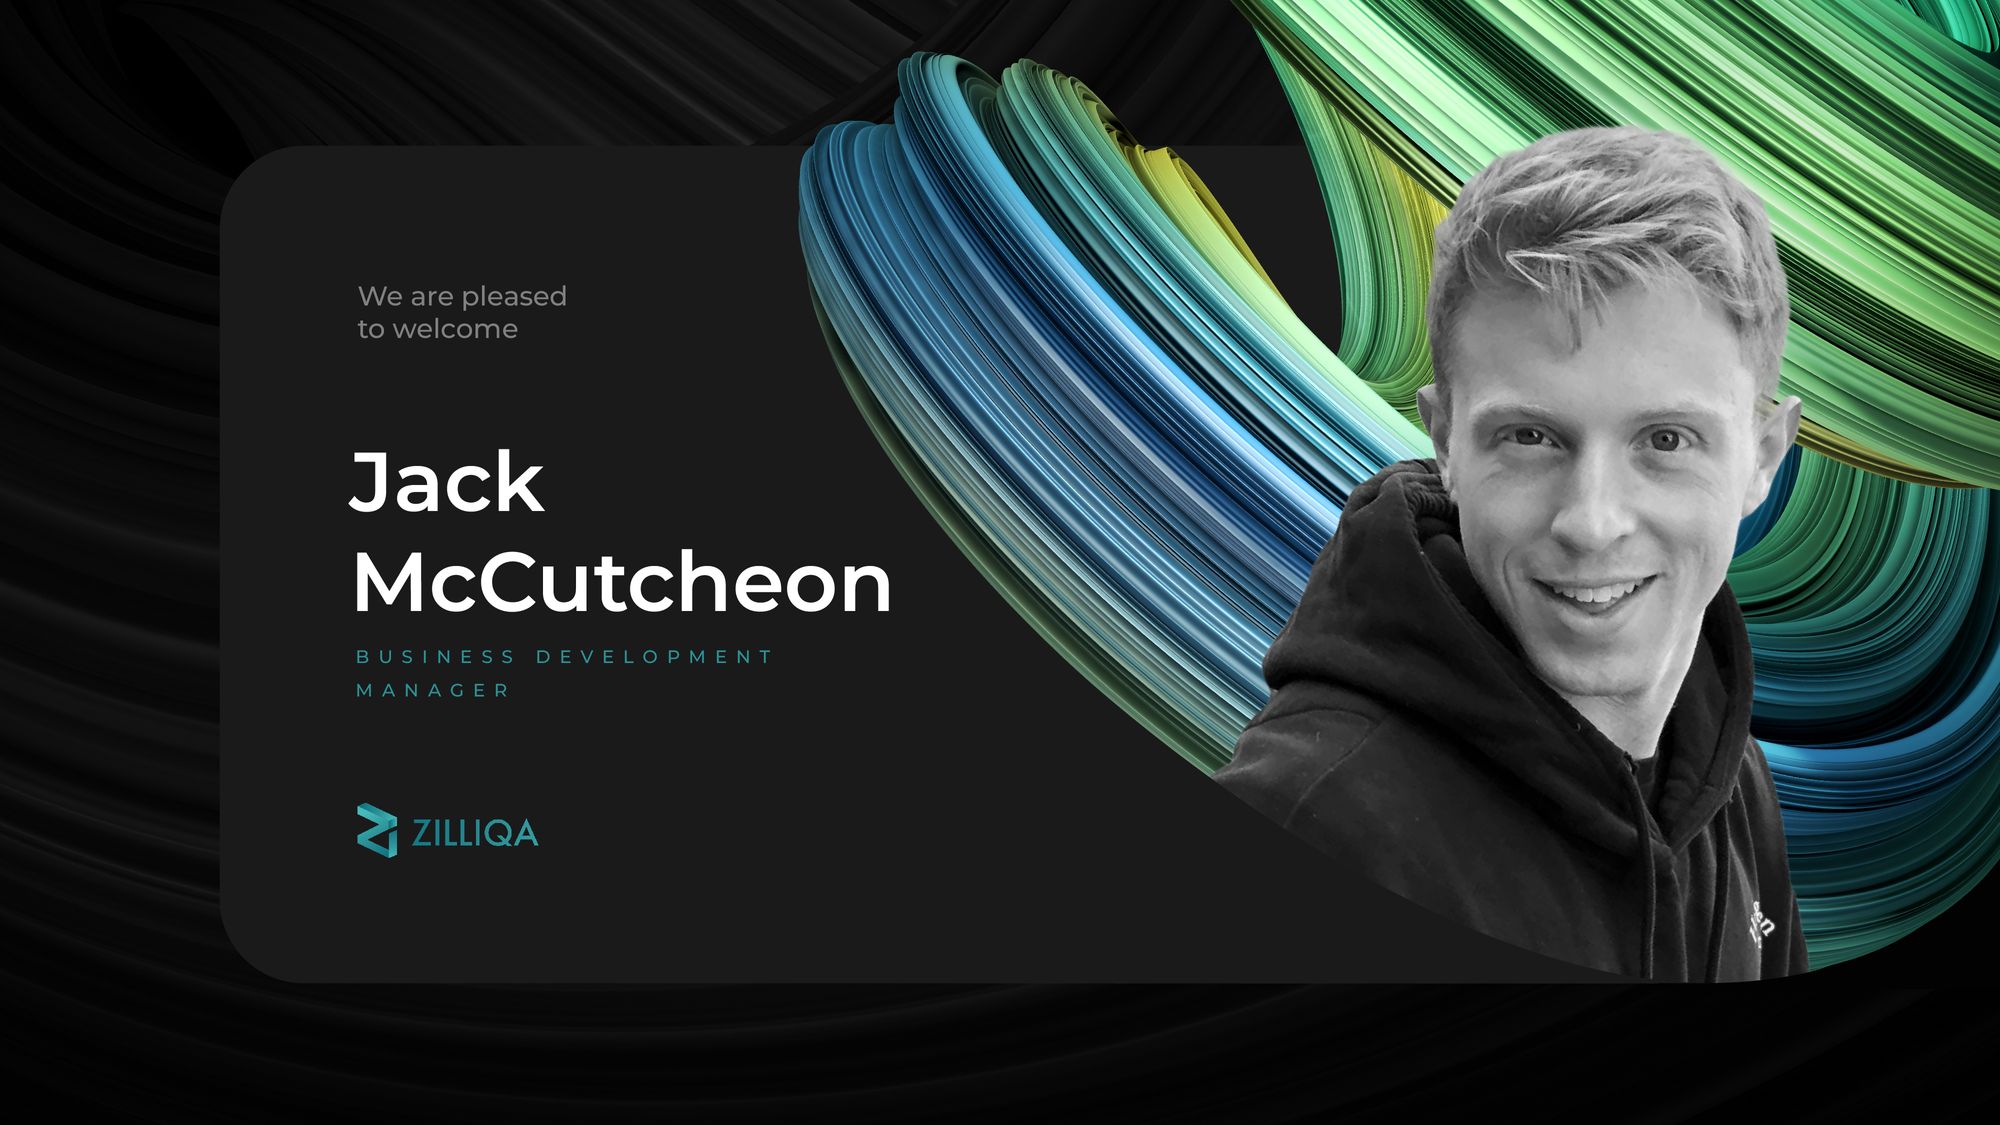 Jack McCutcheon to help Zilliqa level up as Business Development Manager for Gaming